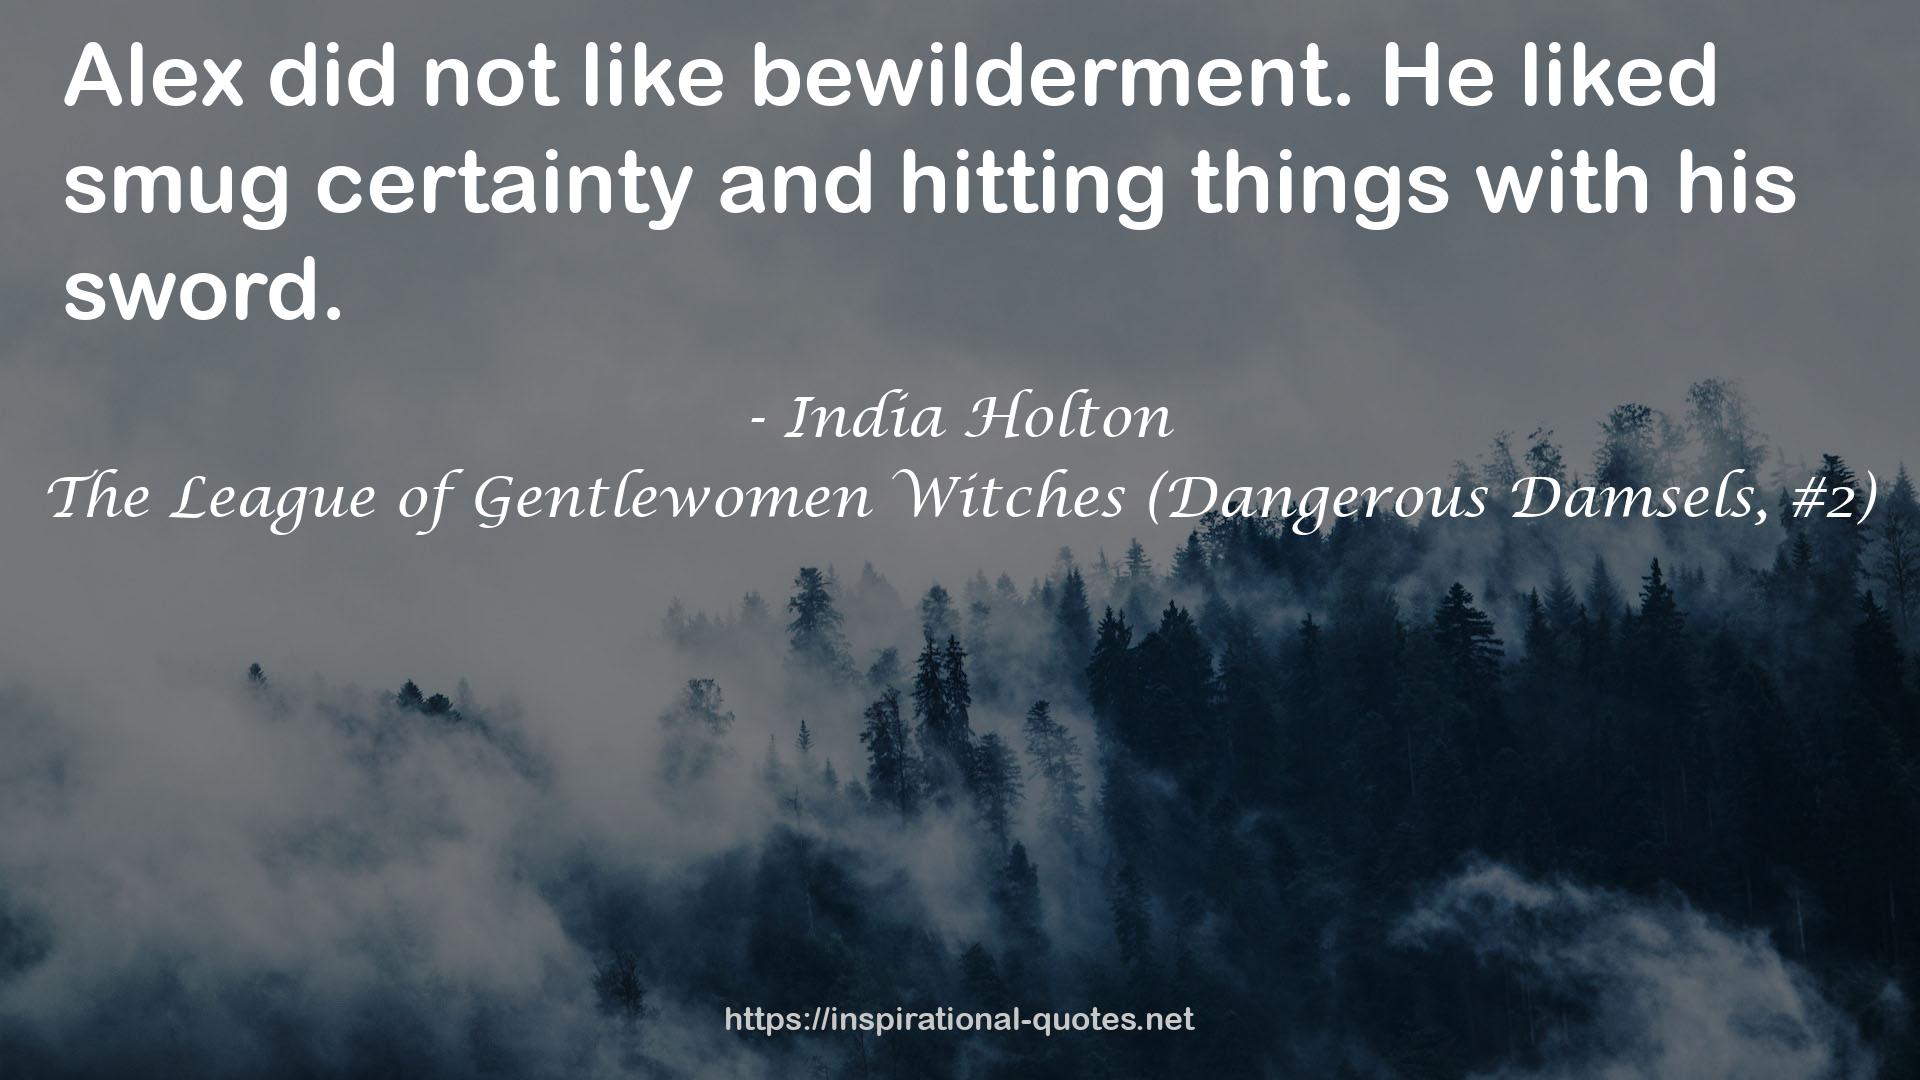 The League of Gentlewomen Witches (Dangerous Damsels, #2) QUOTES